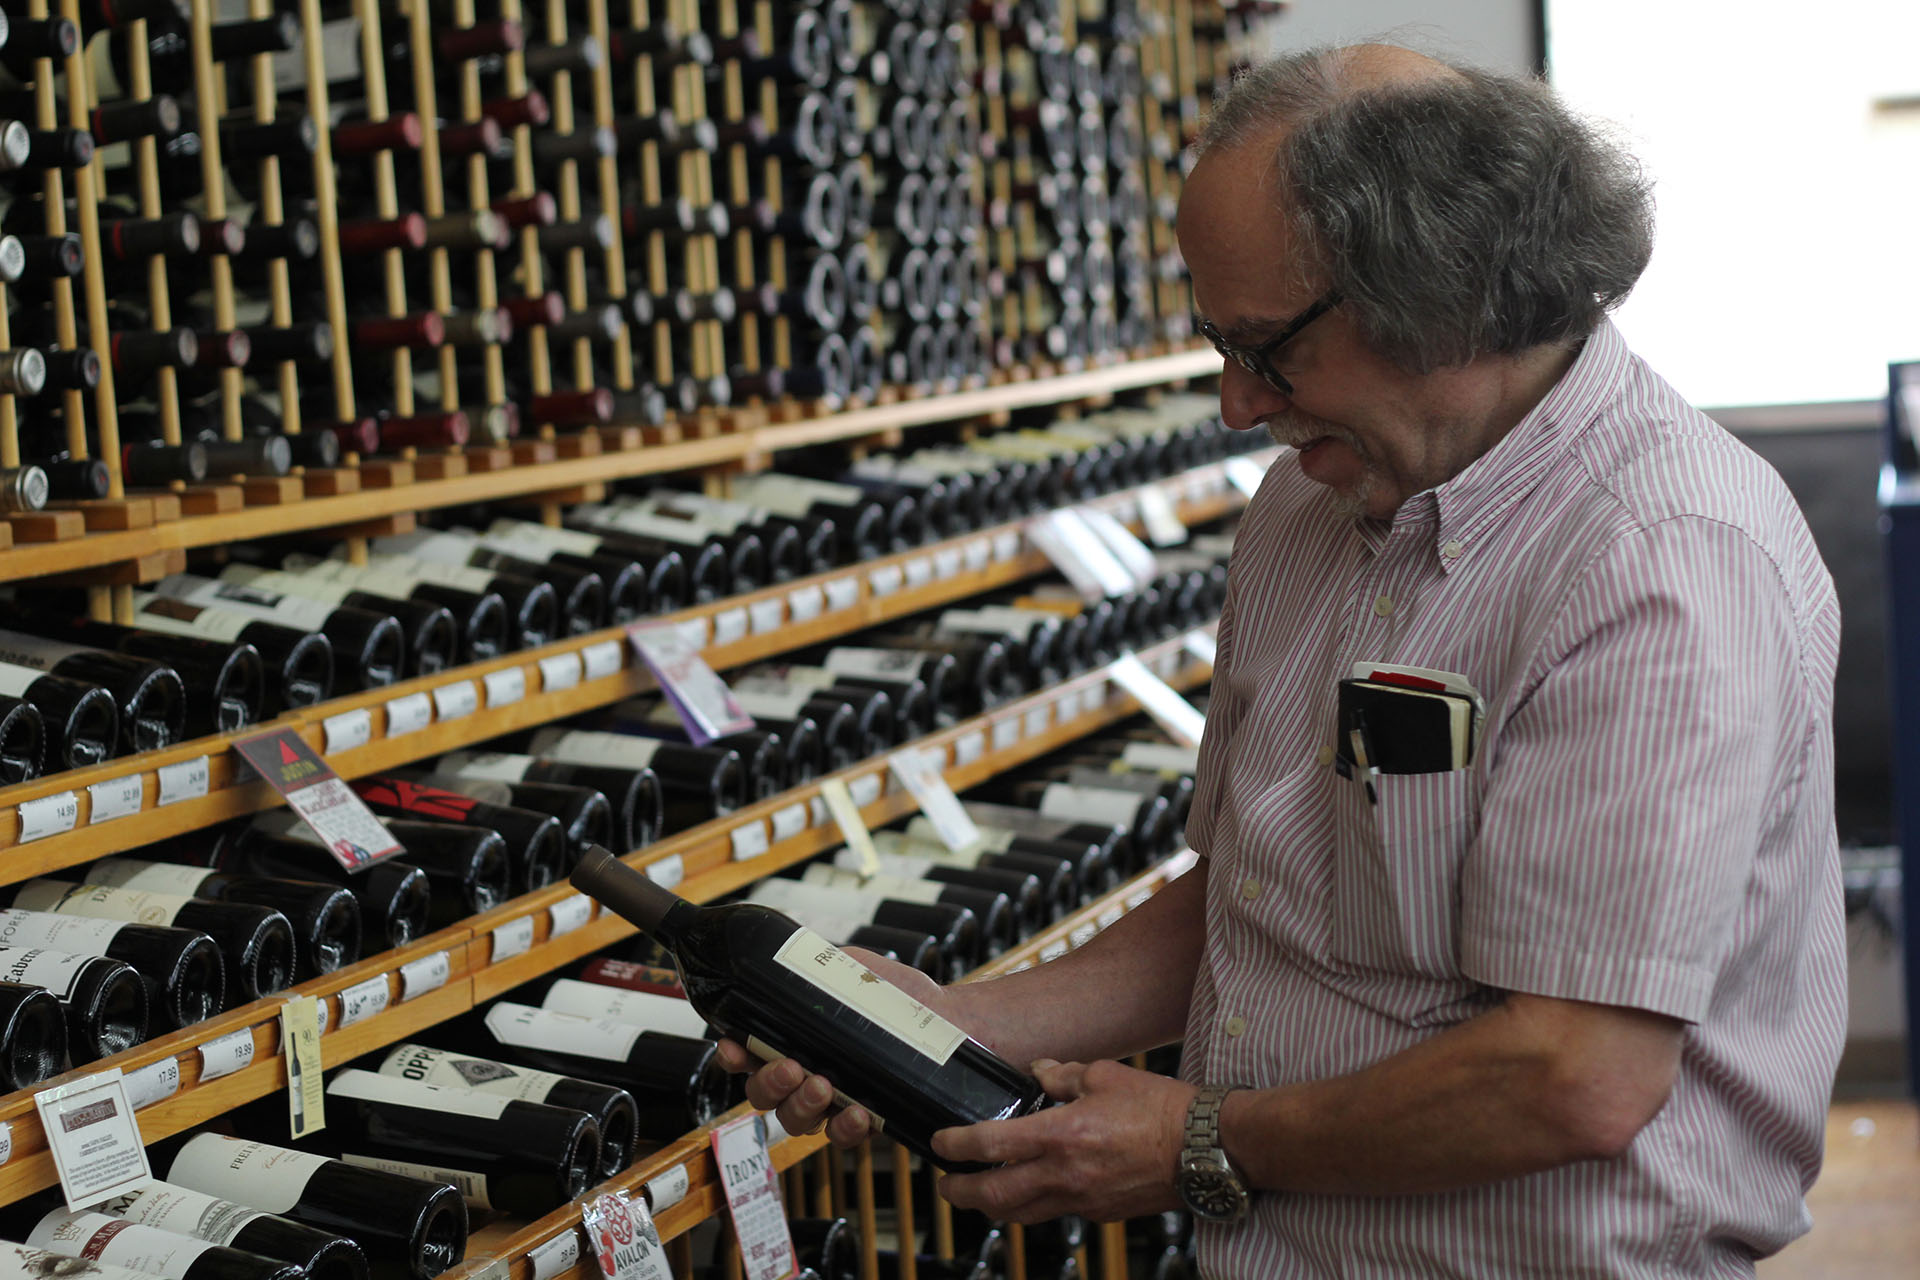 Owner of Barry's Fine Wine & Spirits Looking at Wine